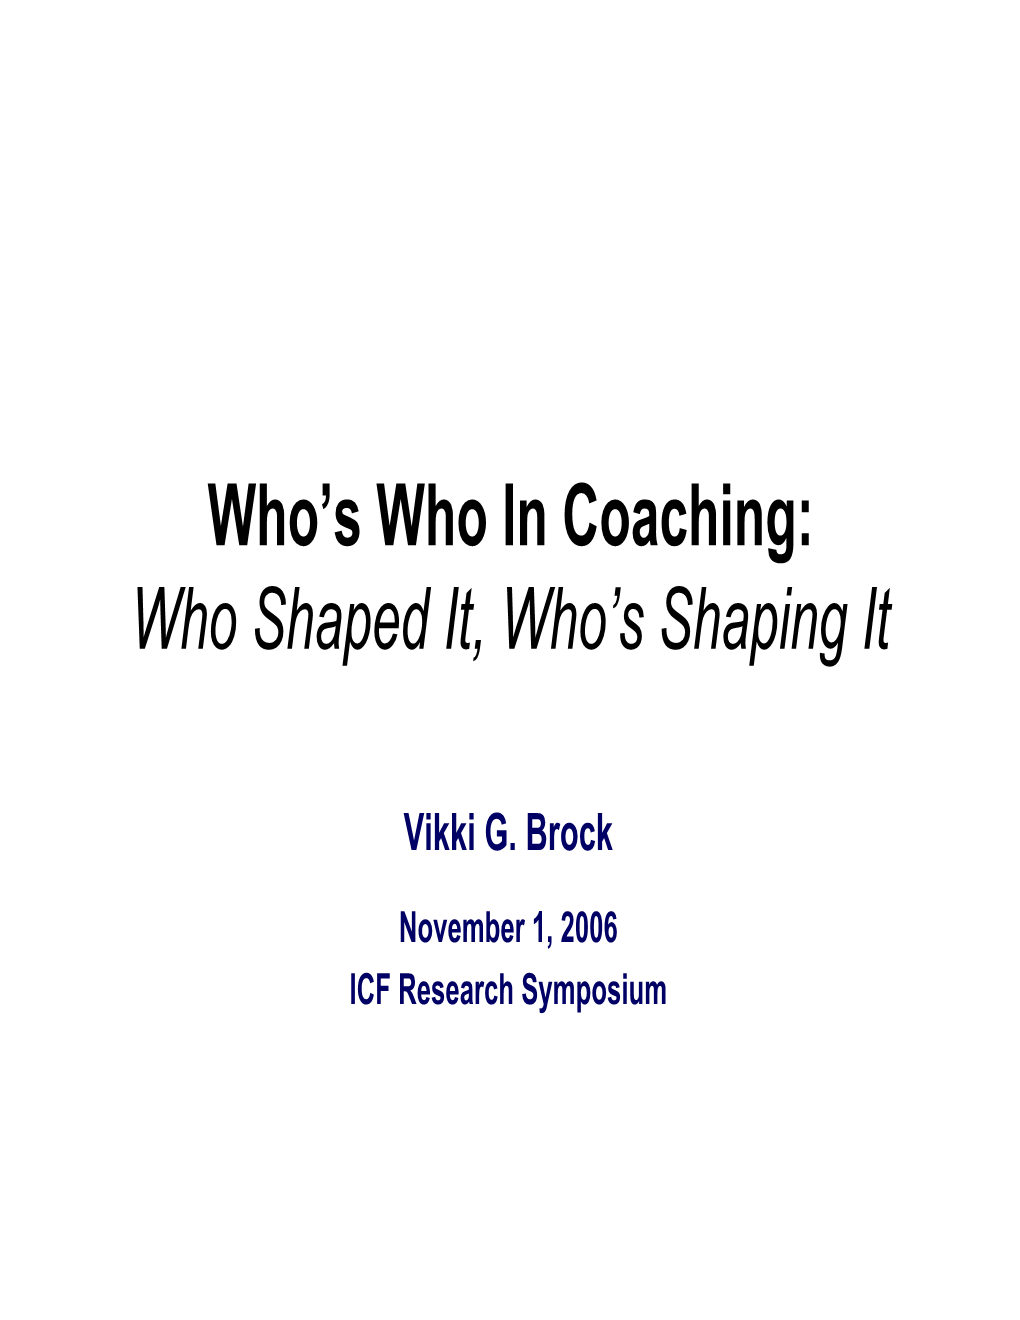 Who's Who in Coaching